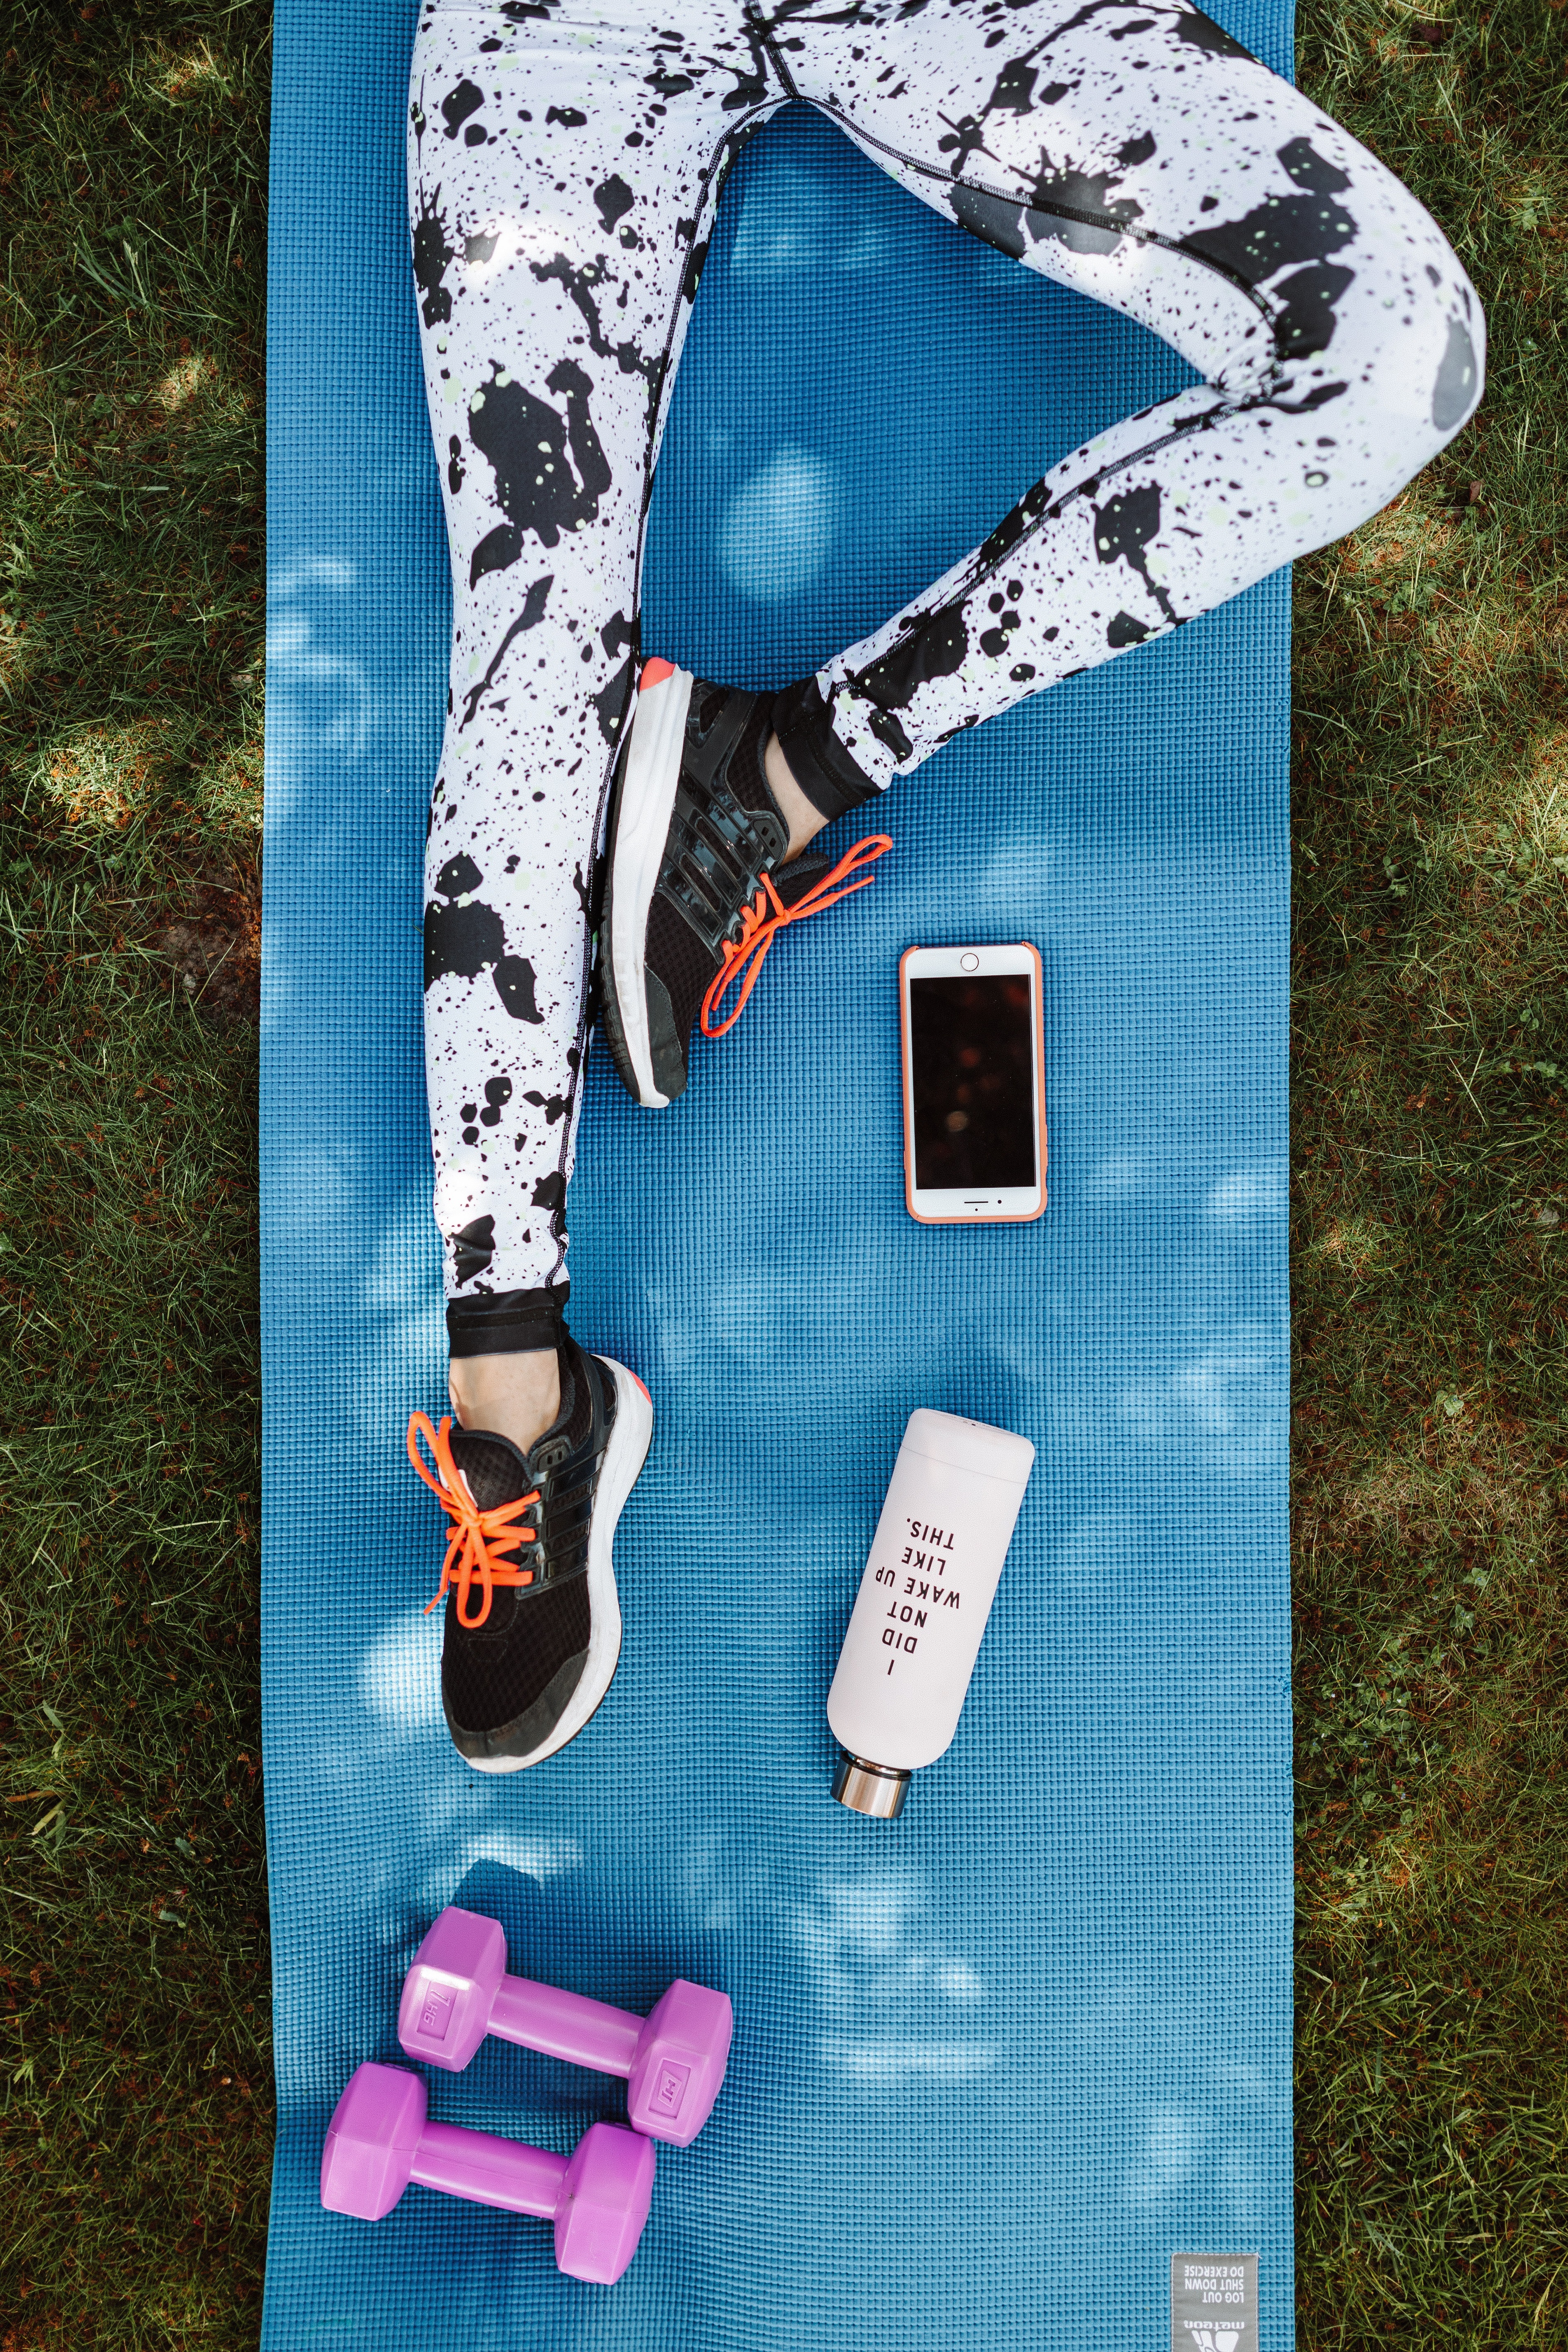 A person's legs on a yoga mat